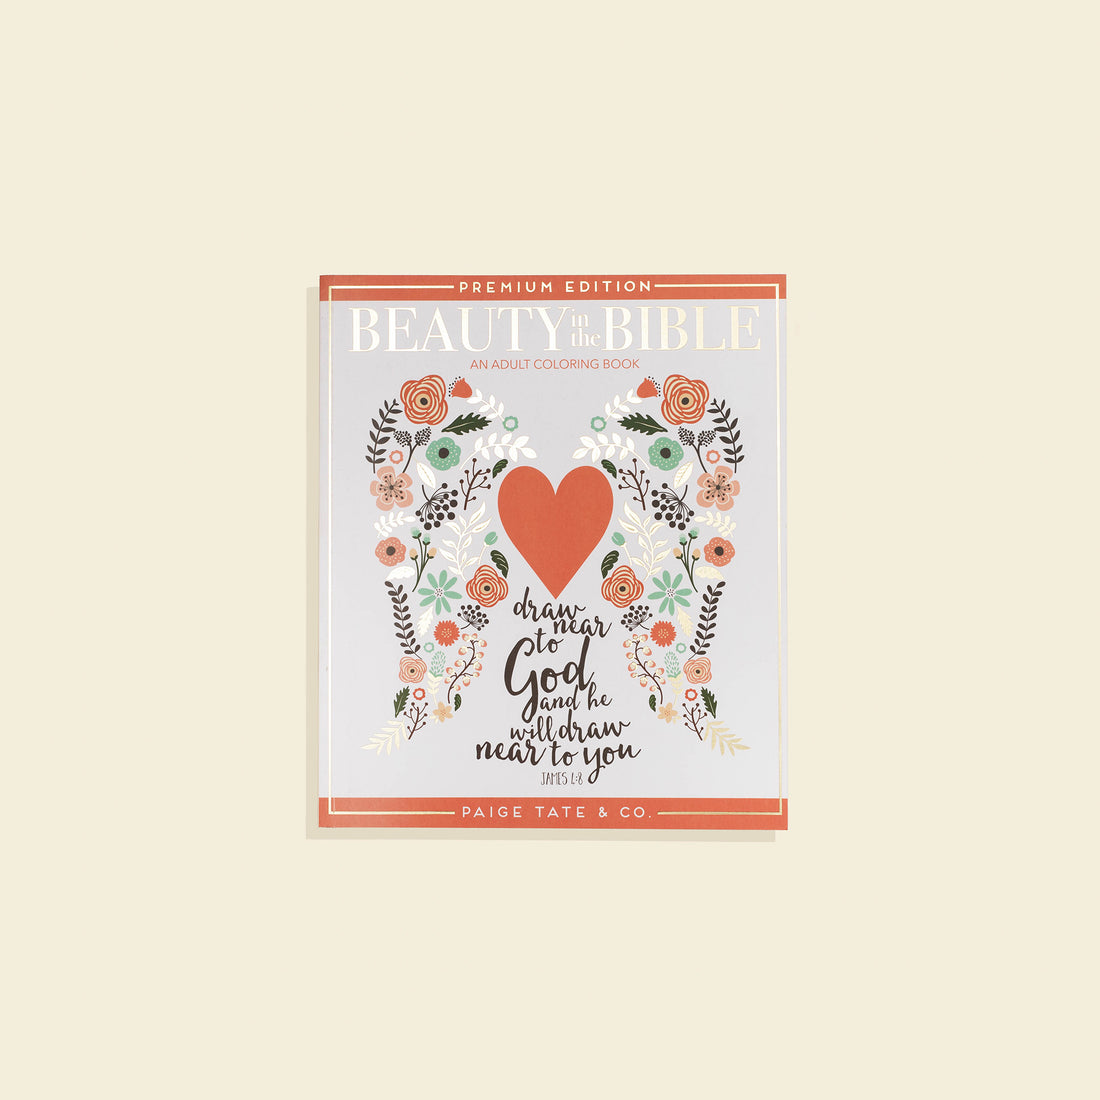 Beauty in the Bible: Christian Adult Coloring Books – Paige Tate and Co.